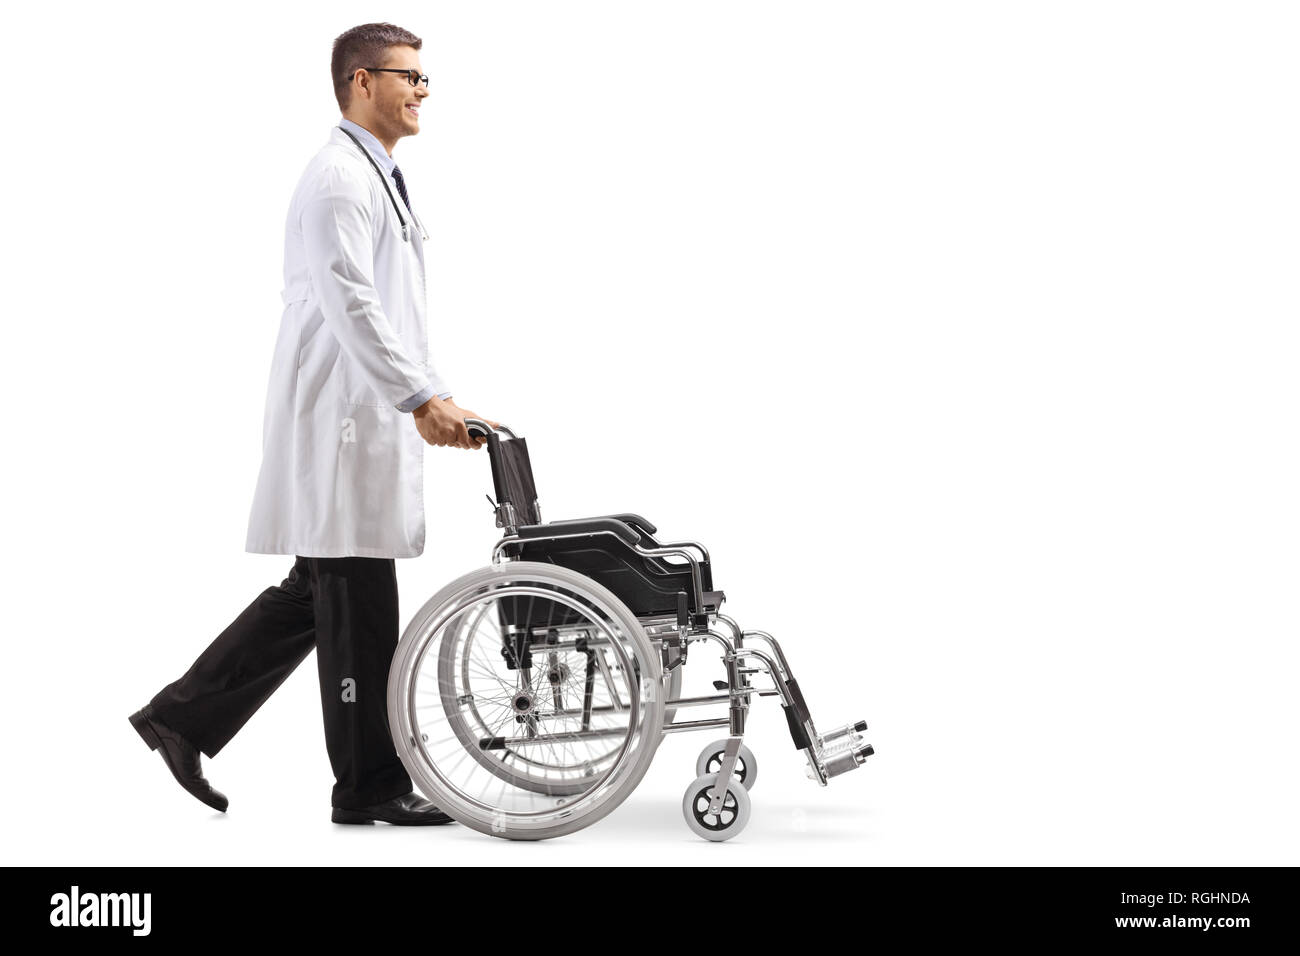 Full length shot of a young male doctor pushing an empty wheelchair isolated on white background Stock Photo